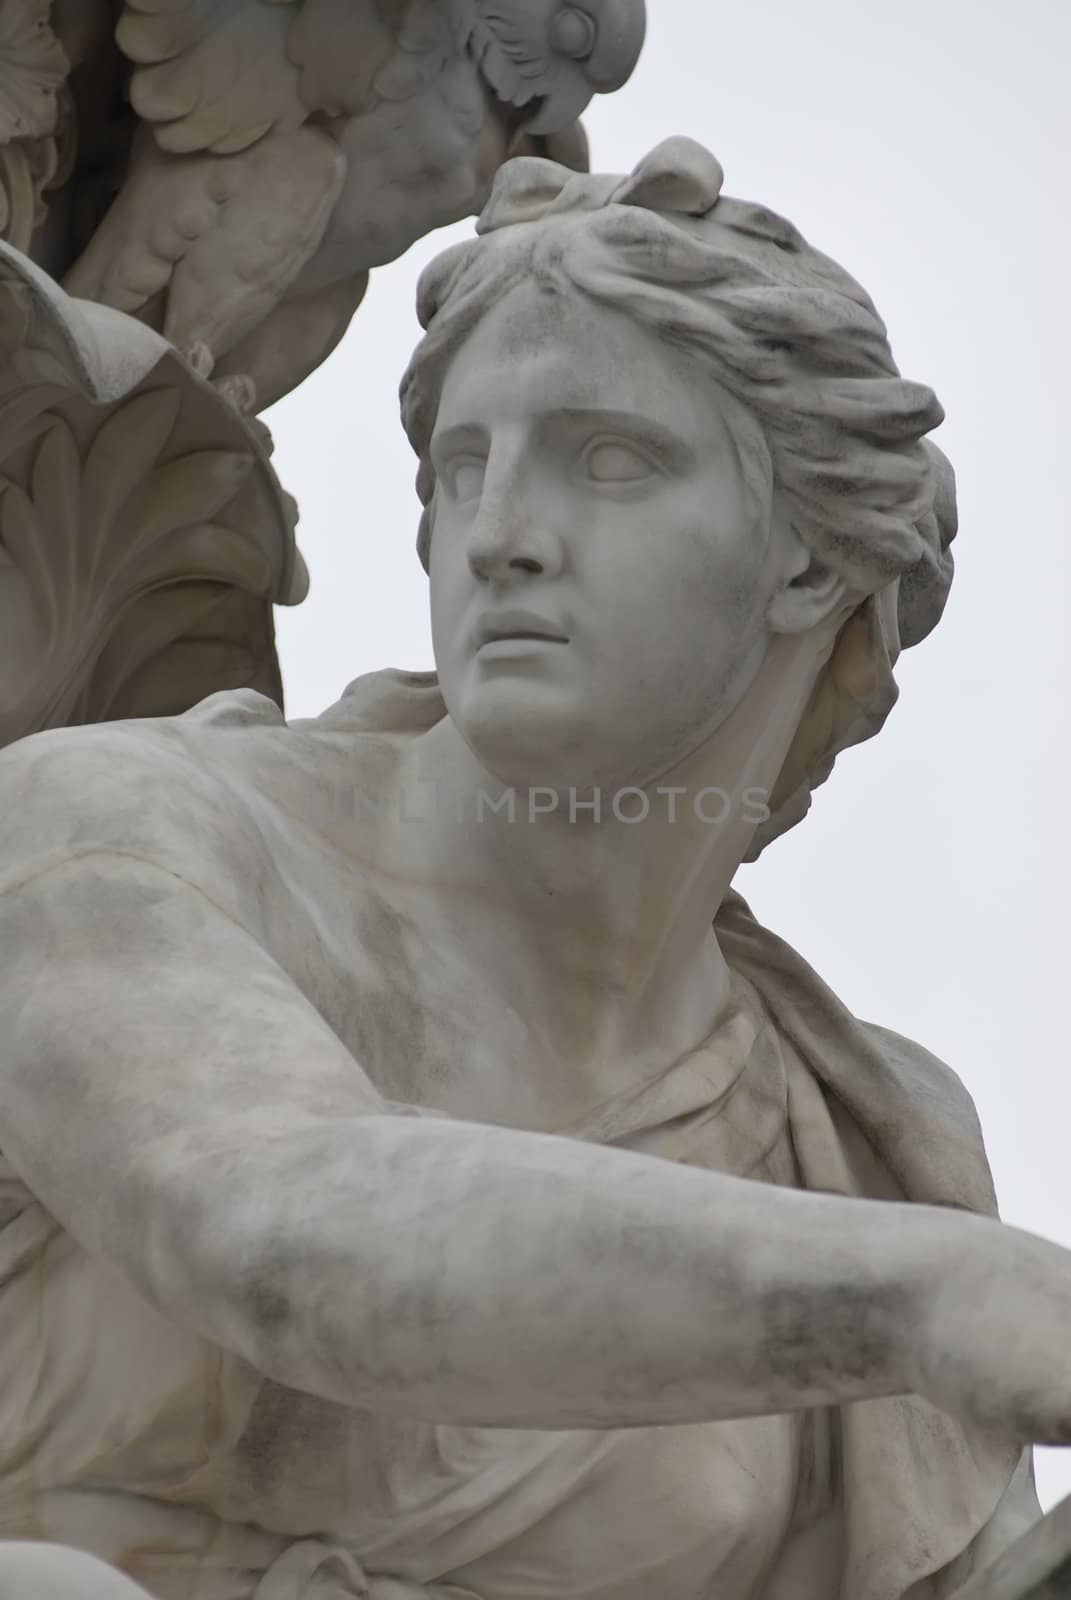 the famous sculptures around the austrian parliament dedicated to the greek goddess pallas athena